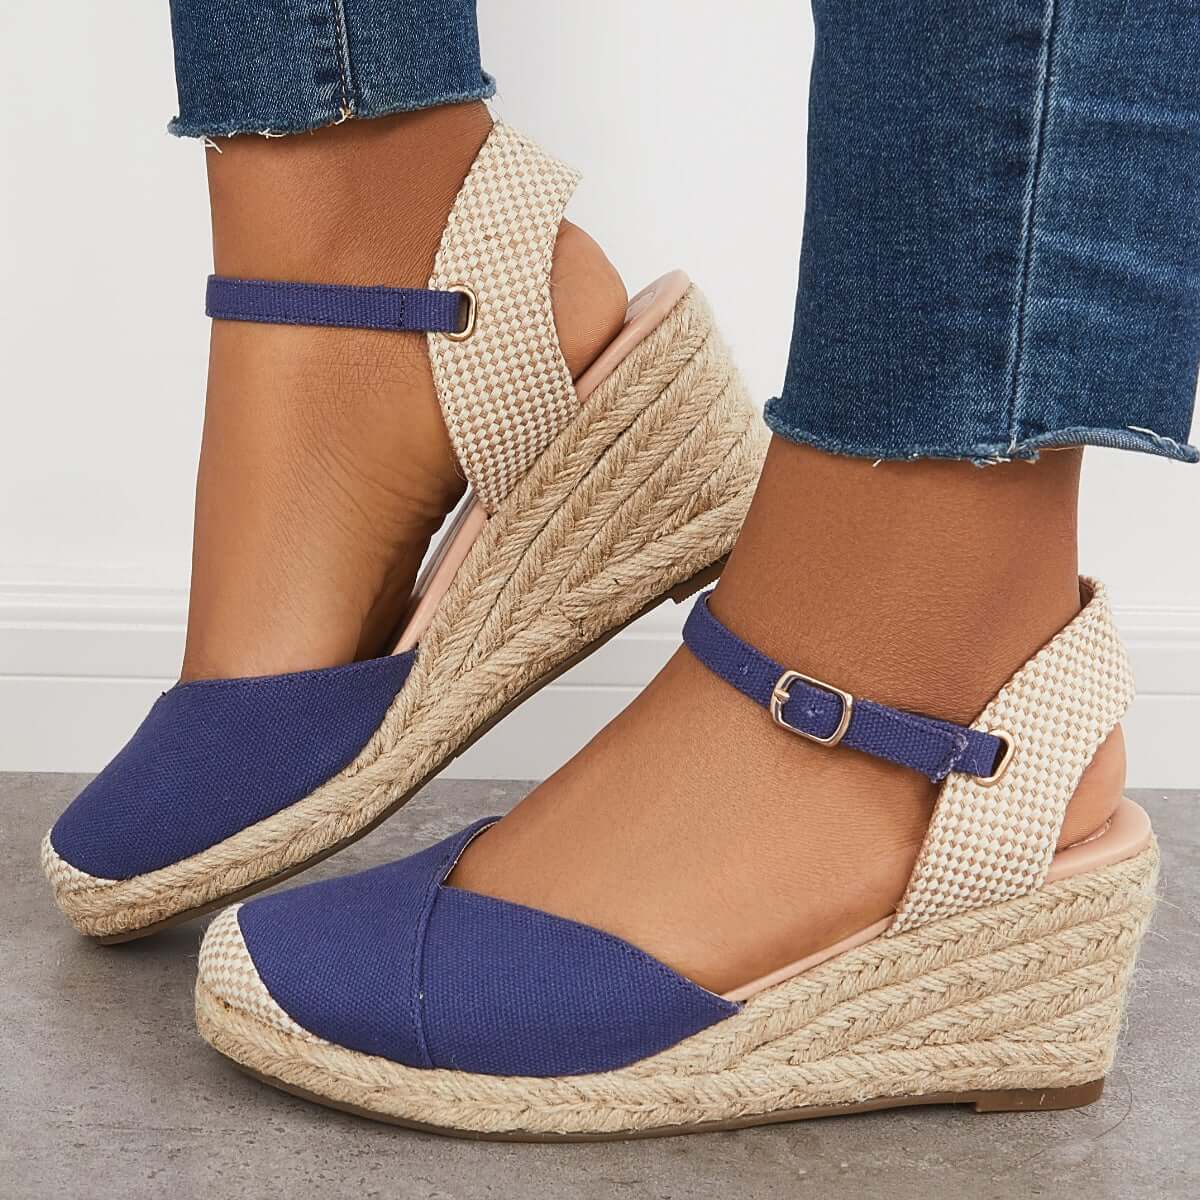 Cosylands Closed Toe Espadrilles Wedge Ankle Strap Sandals